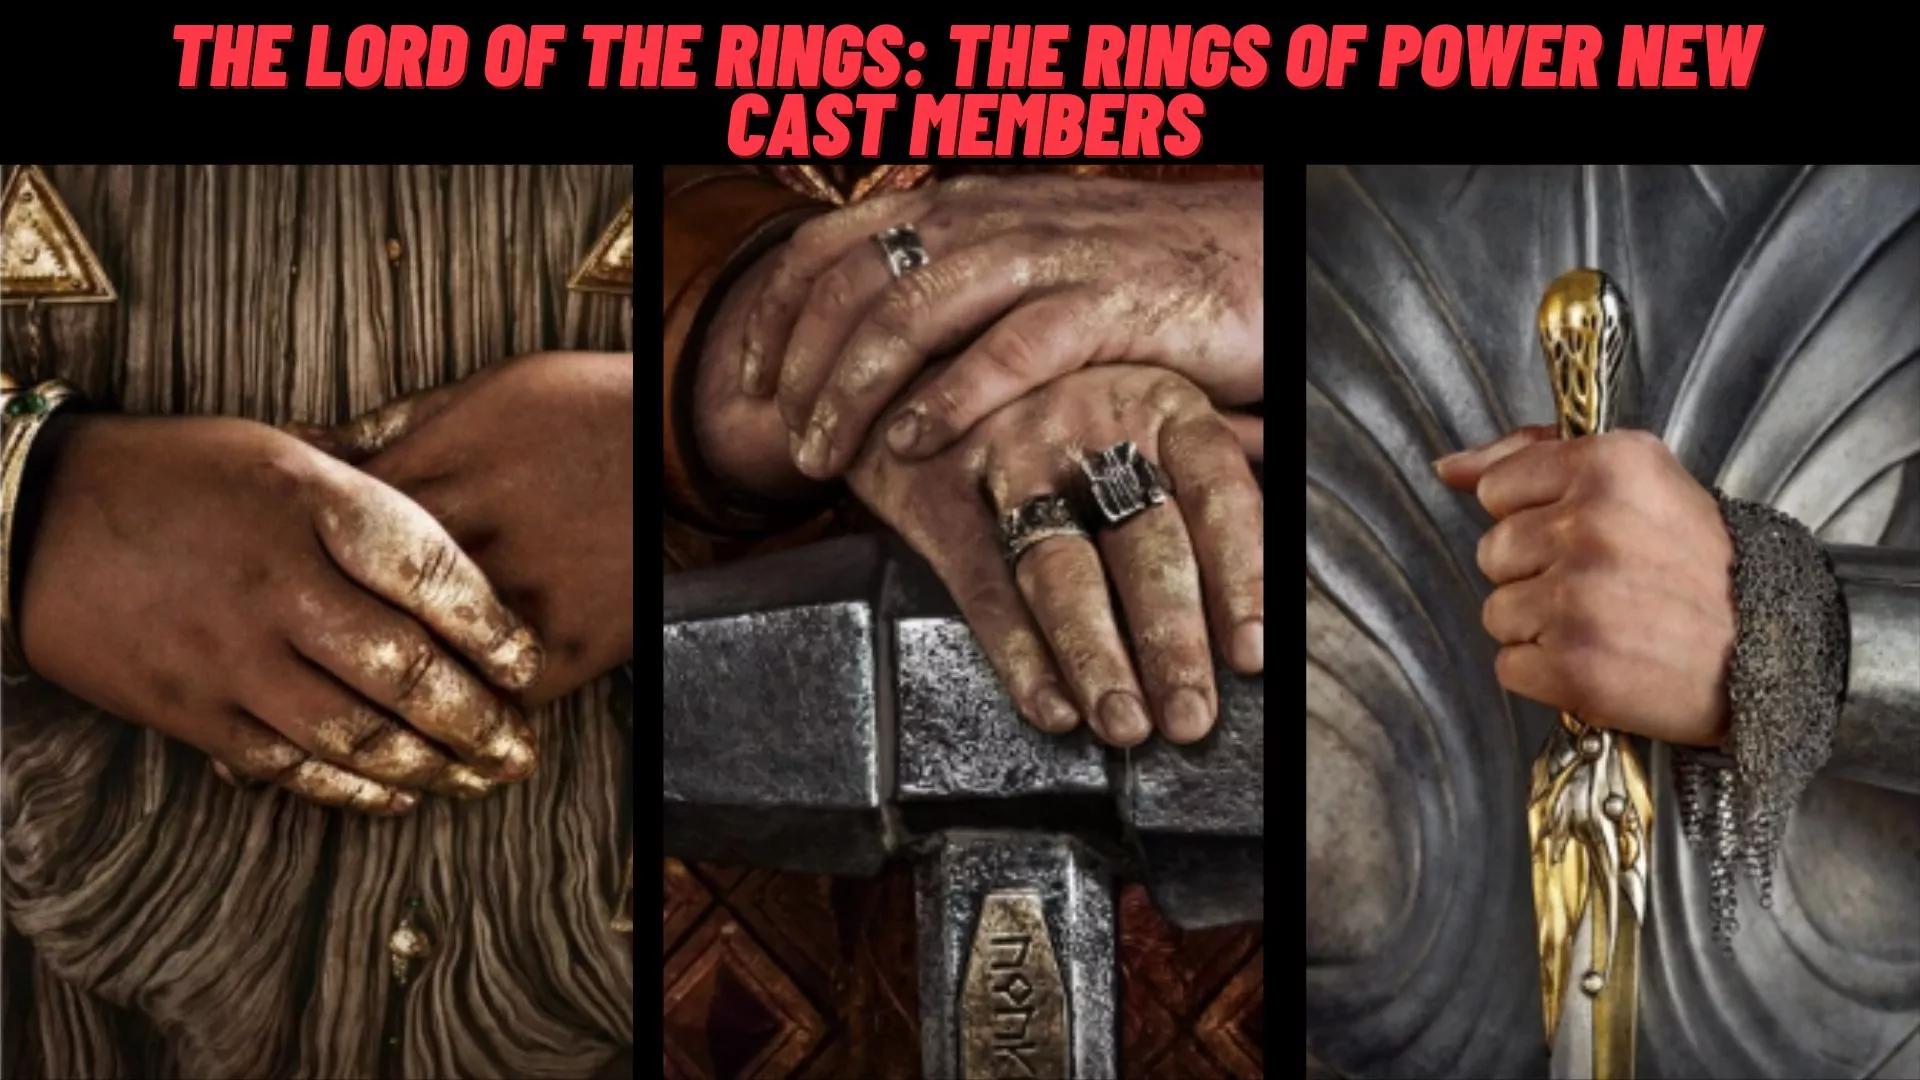 The Lord of the Rings: The Rings of Power New Cast Members